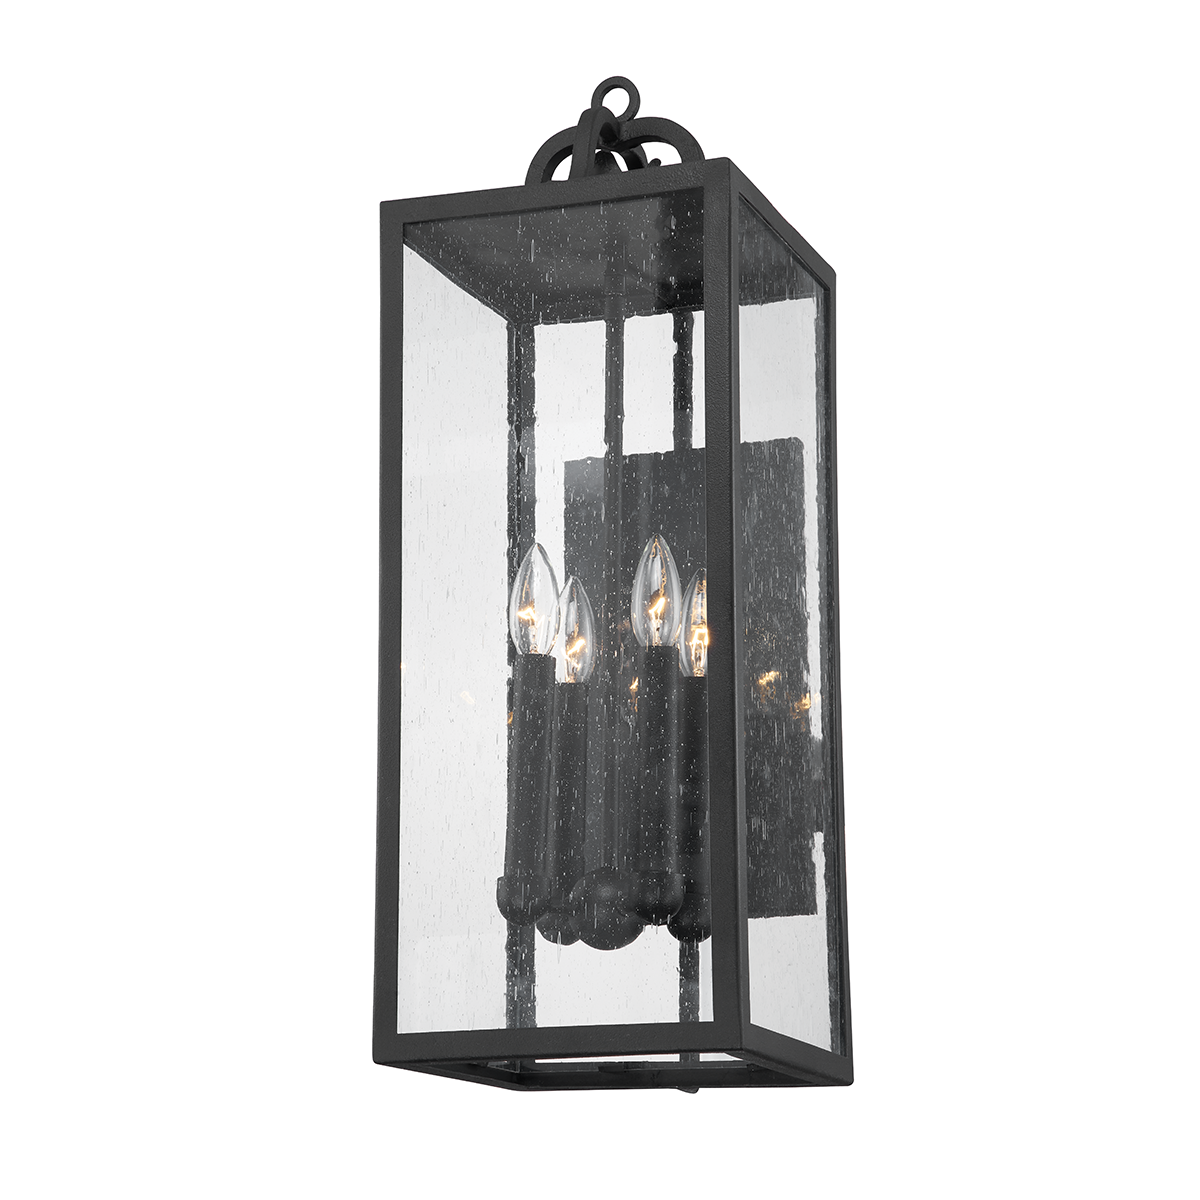 Troy CAIDEN 4 LIGHT EXTERIOR WALL SCONCE B2063 Outdoor l Wall Troy Lighting FORGED IRON  